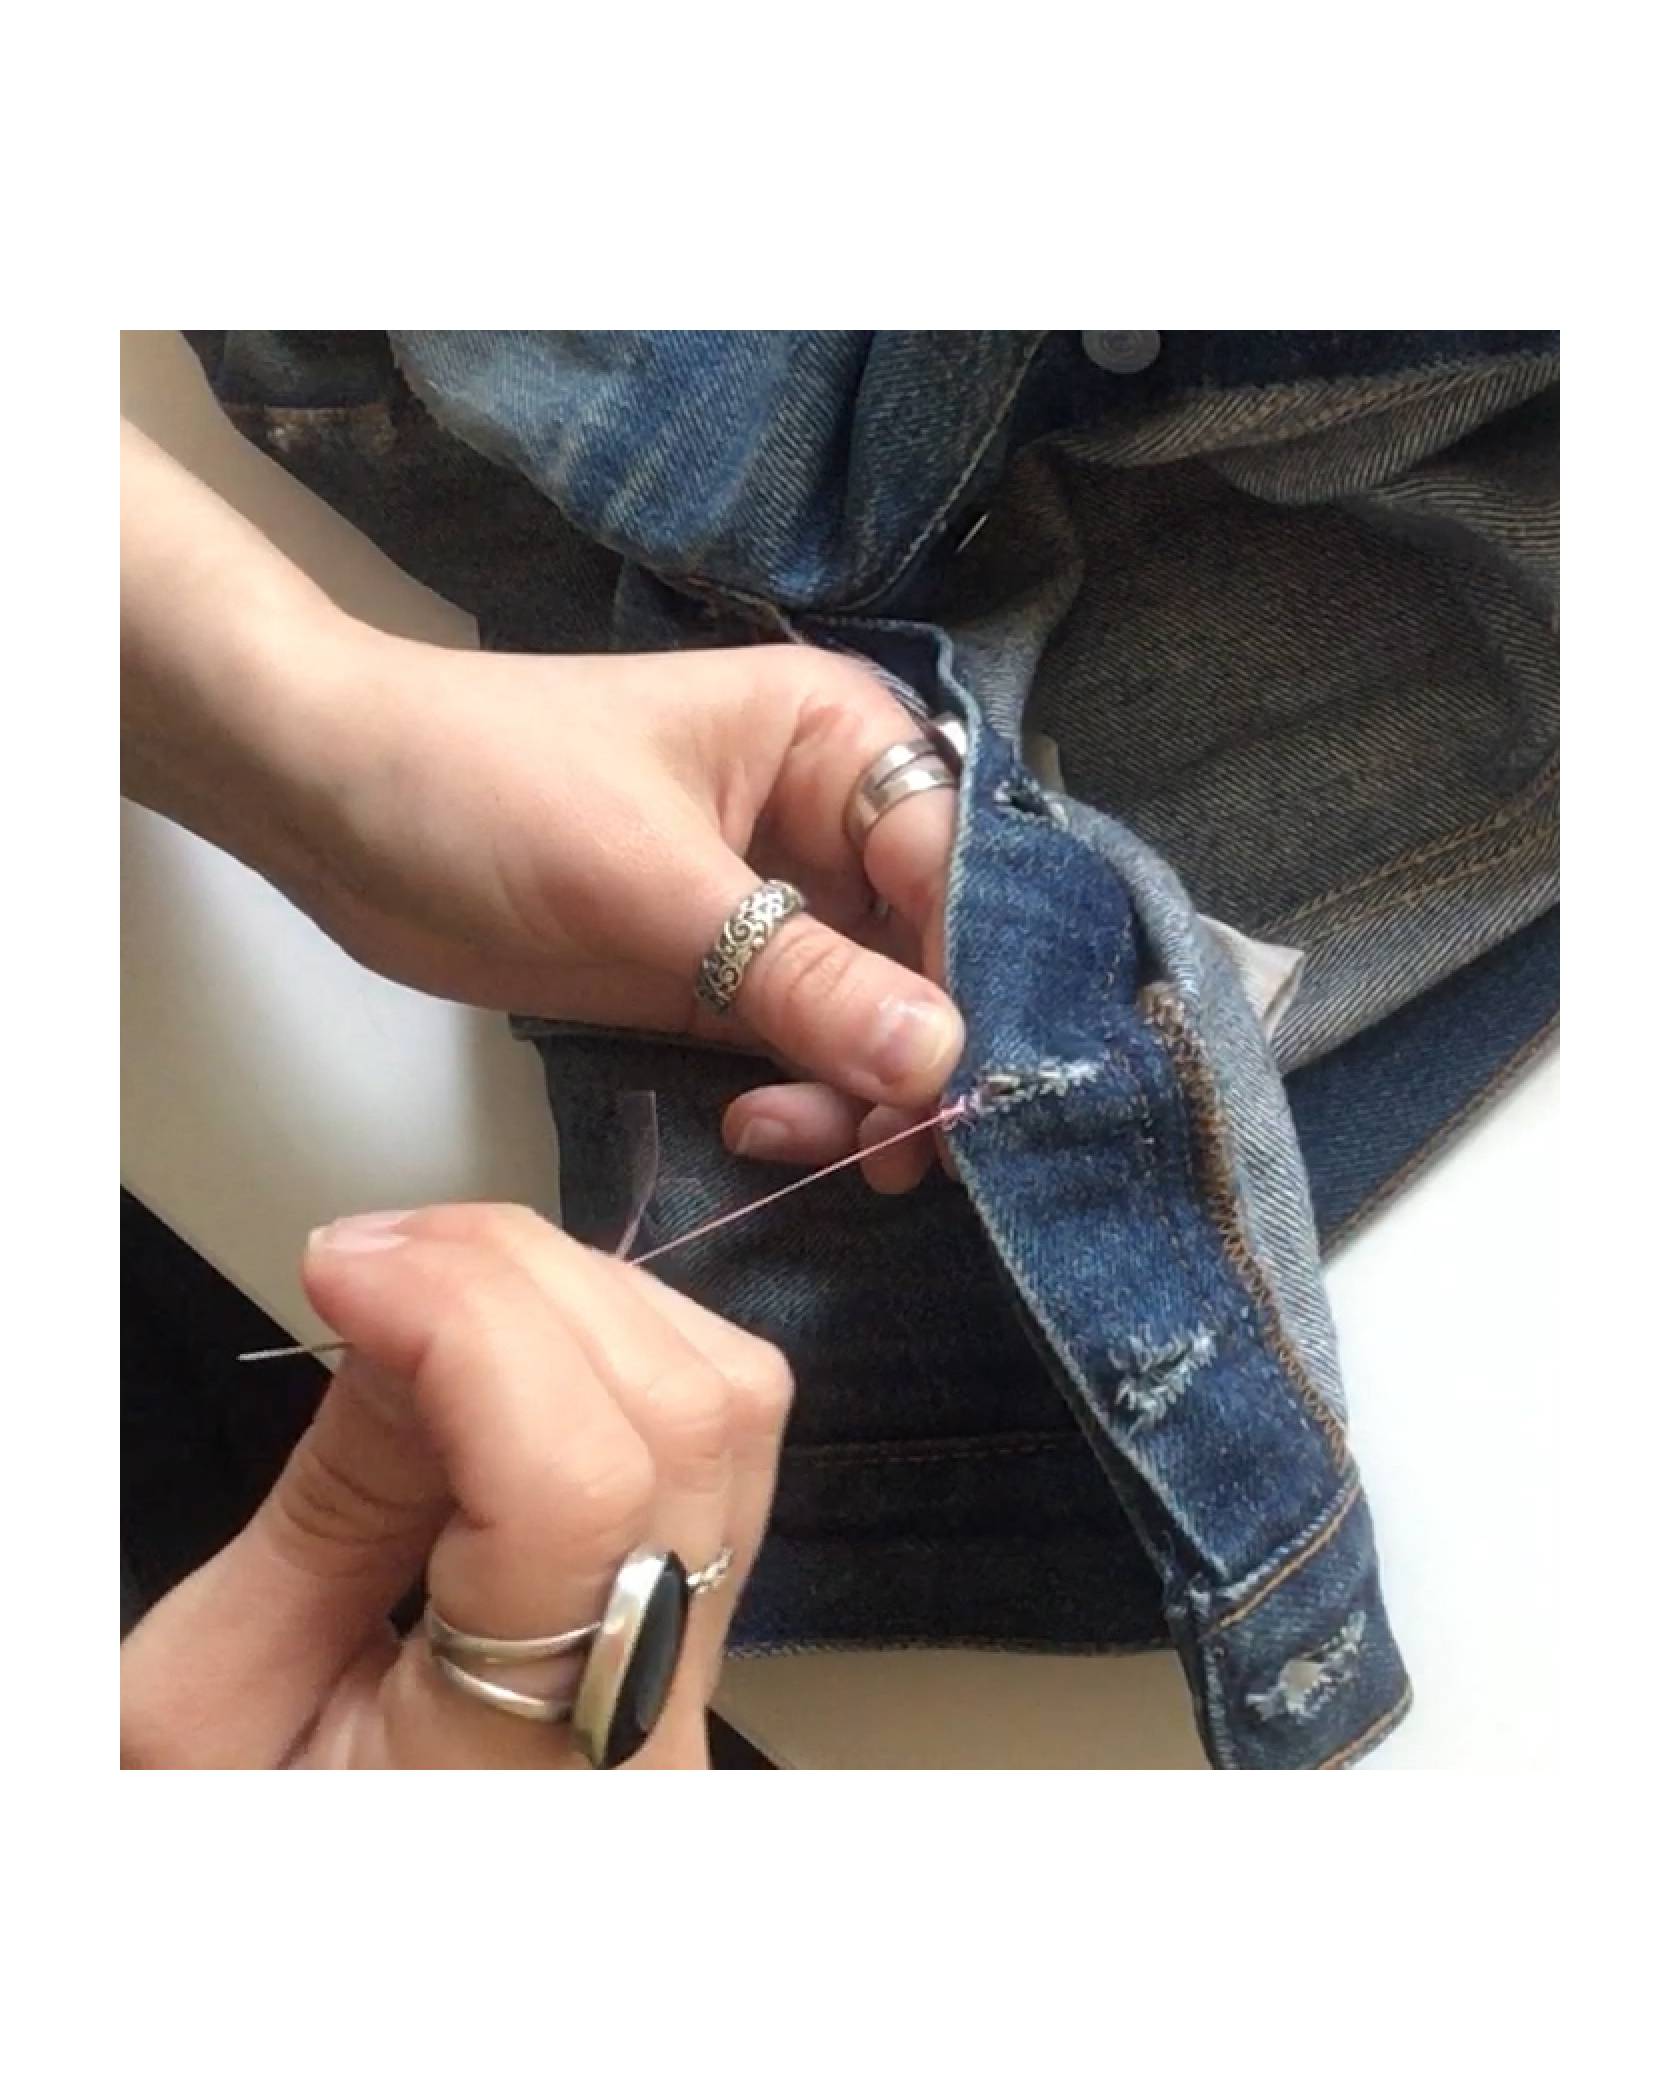 Image of the Levi's® Tailor finishing a stitch with a knot by winding the thread back and forth through the denim jeans.